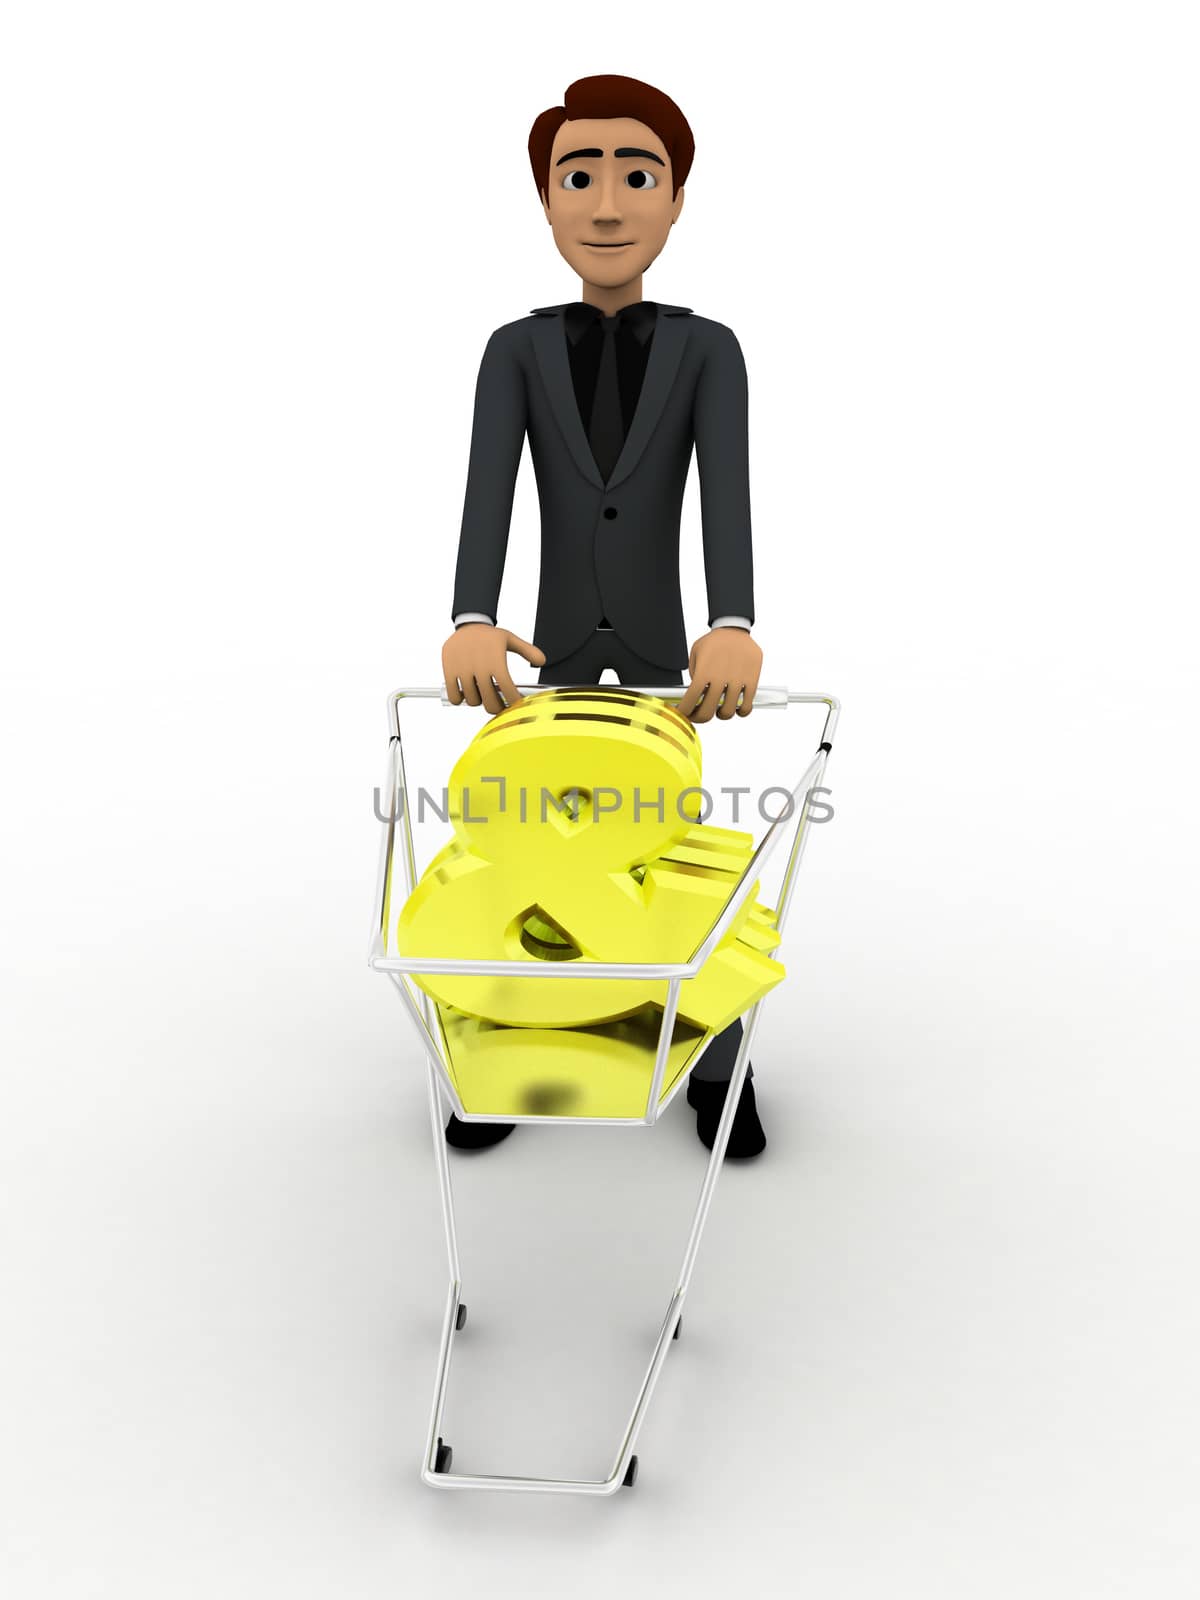 3d man pulling dollar symbol in cart concept by touchmenithin@gmail.com